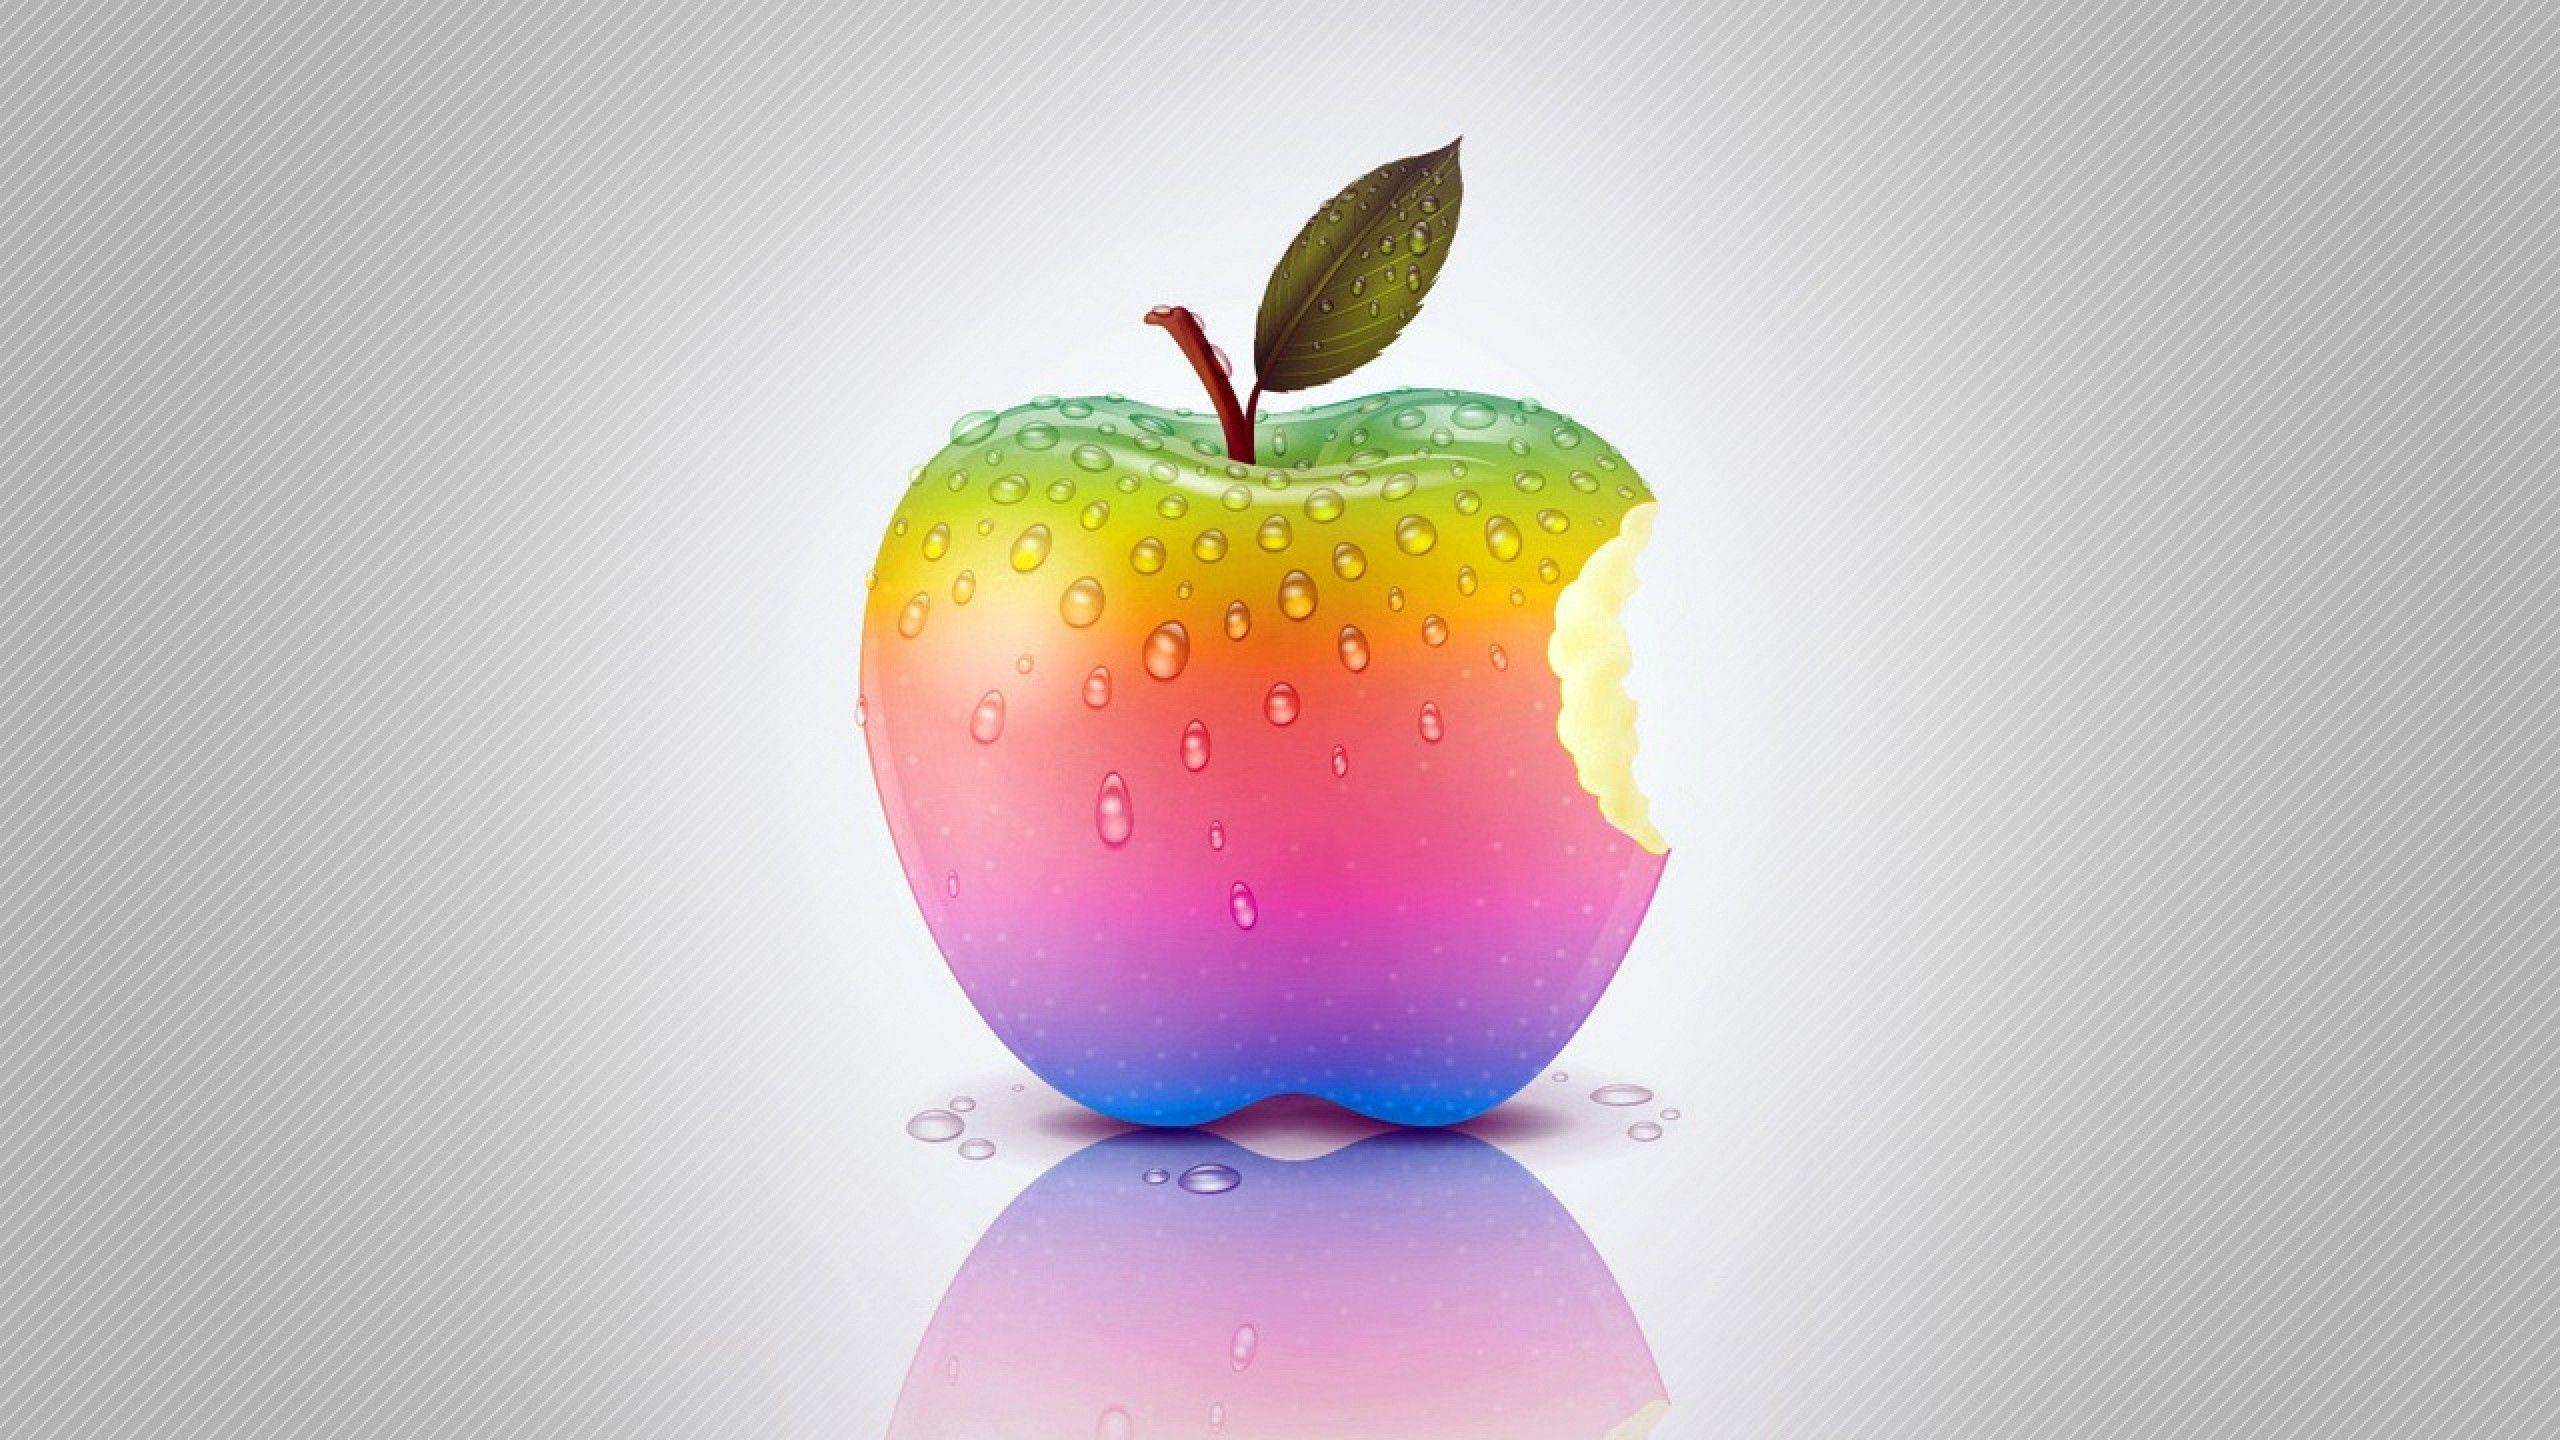 Colorful Apple Wallpaper Wide or HDD Wallpaper